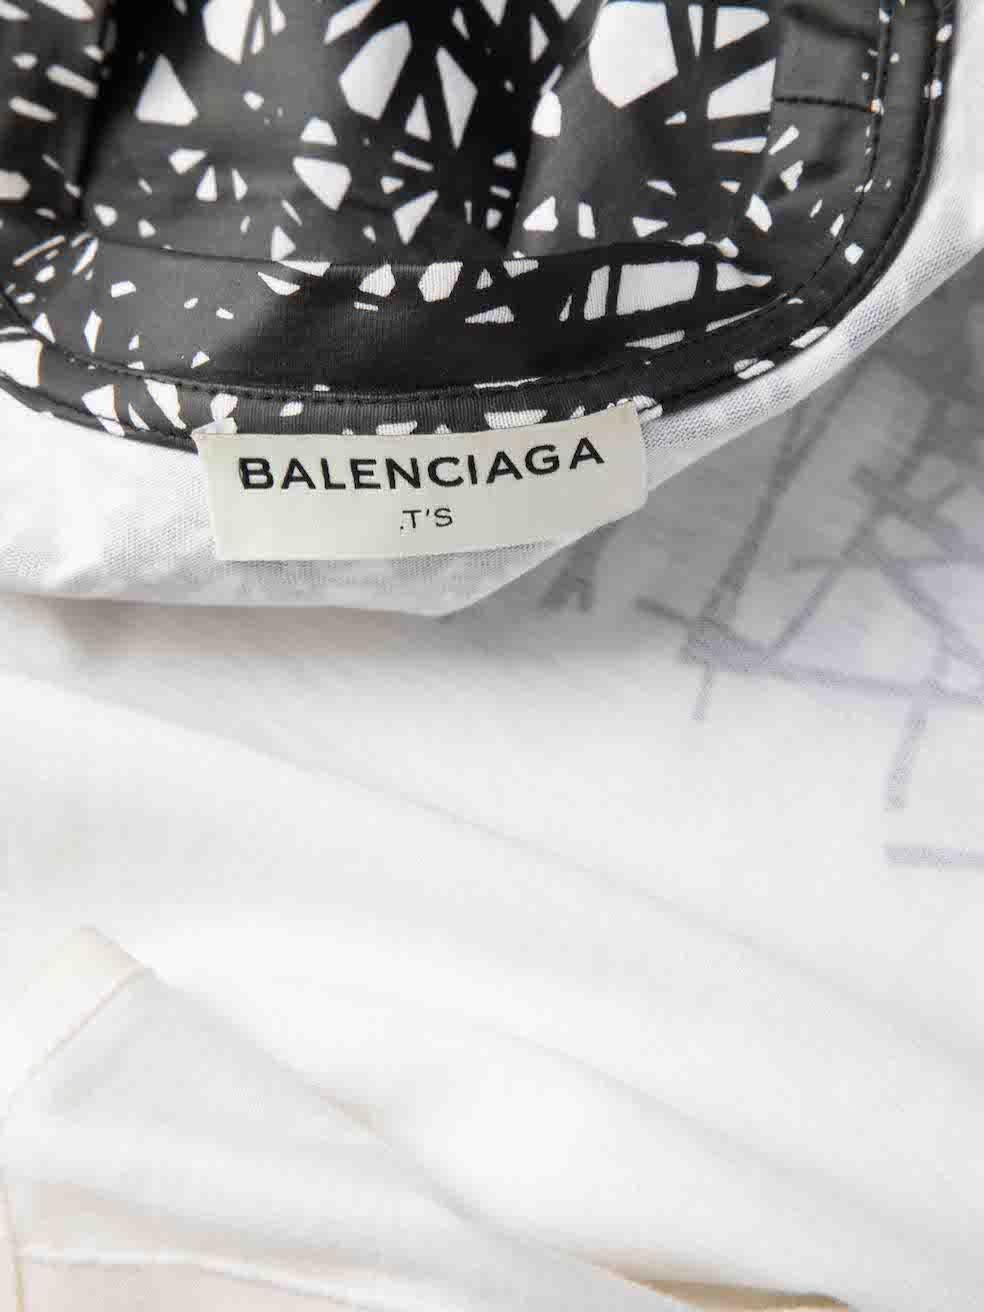 Balenciaga Women's White Abstract Graffiti Print T-Shirt In Good Condition For Sale In London, GB